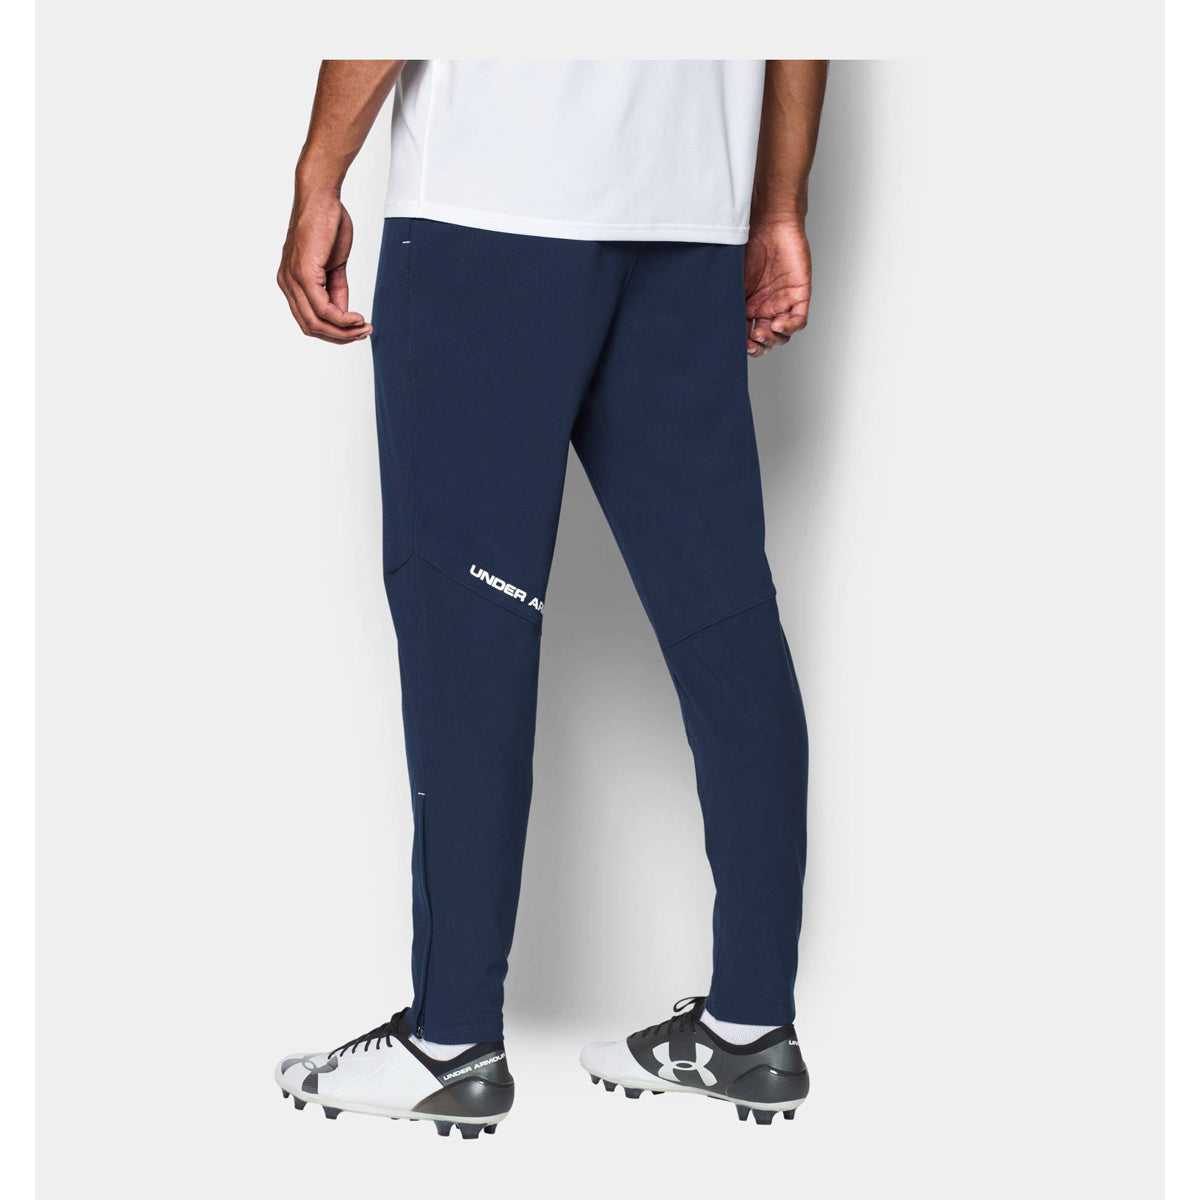 under armour challenger knit pants, Off 67%